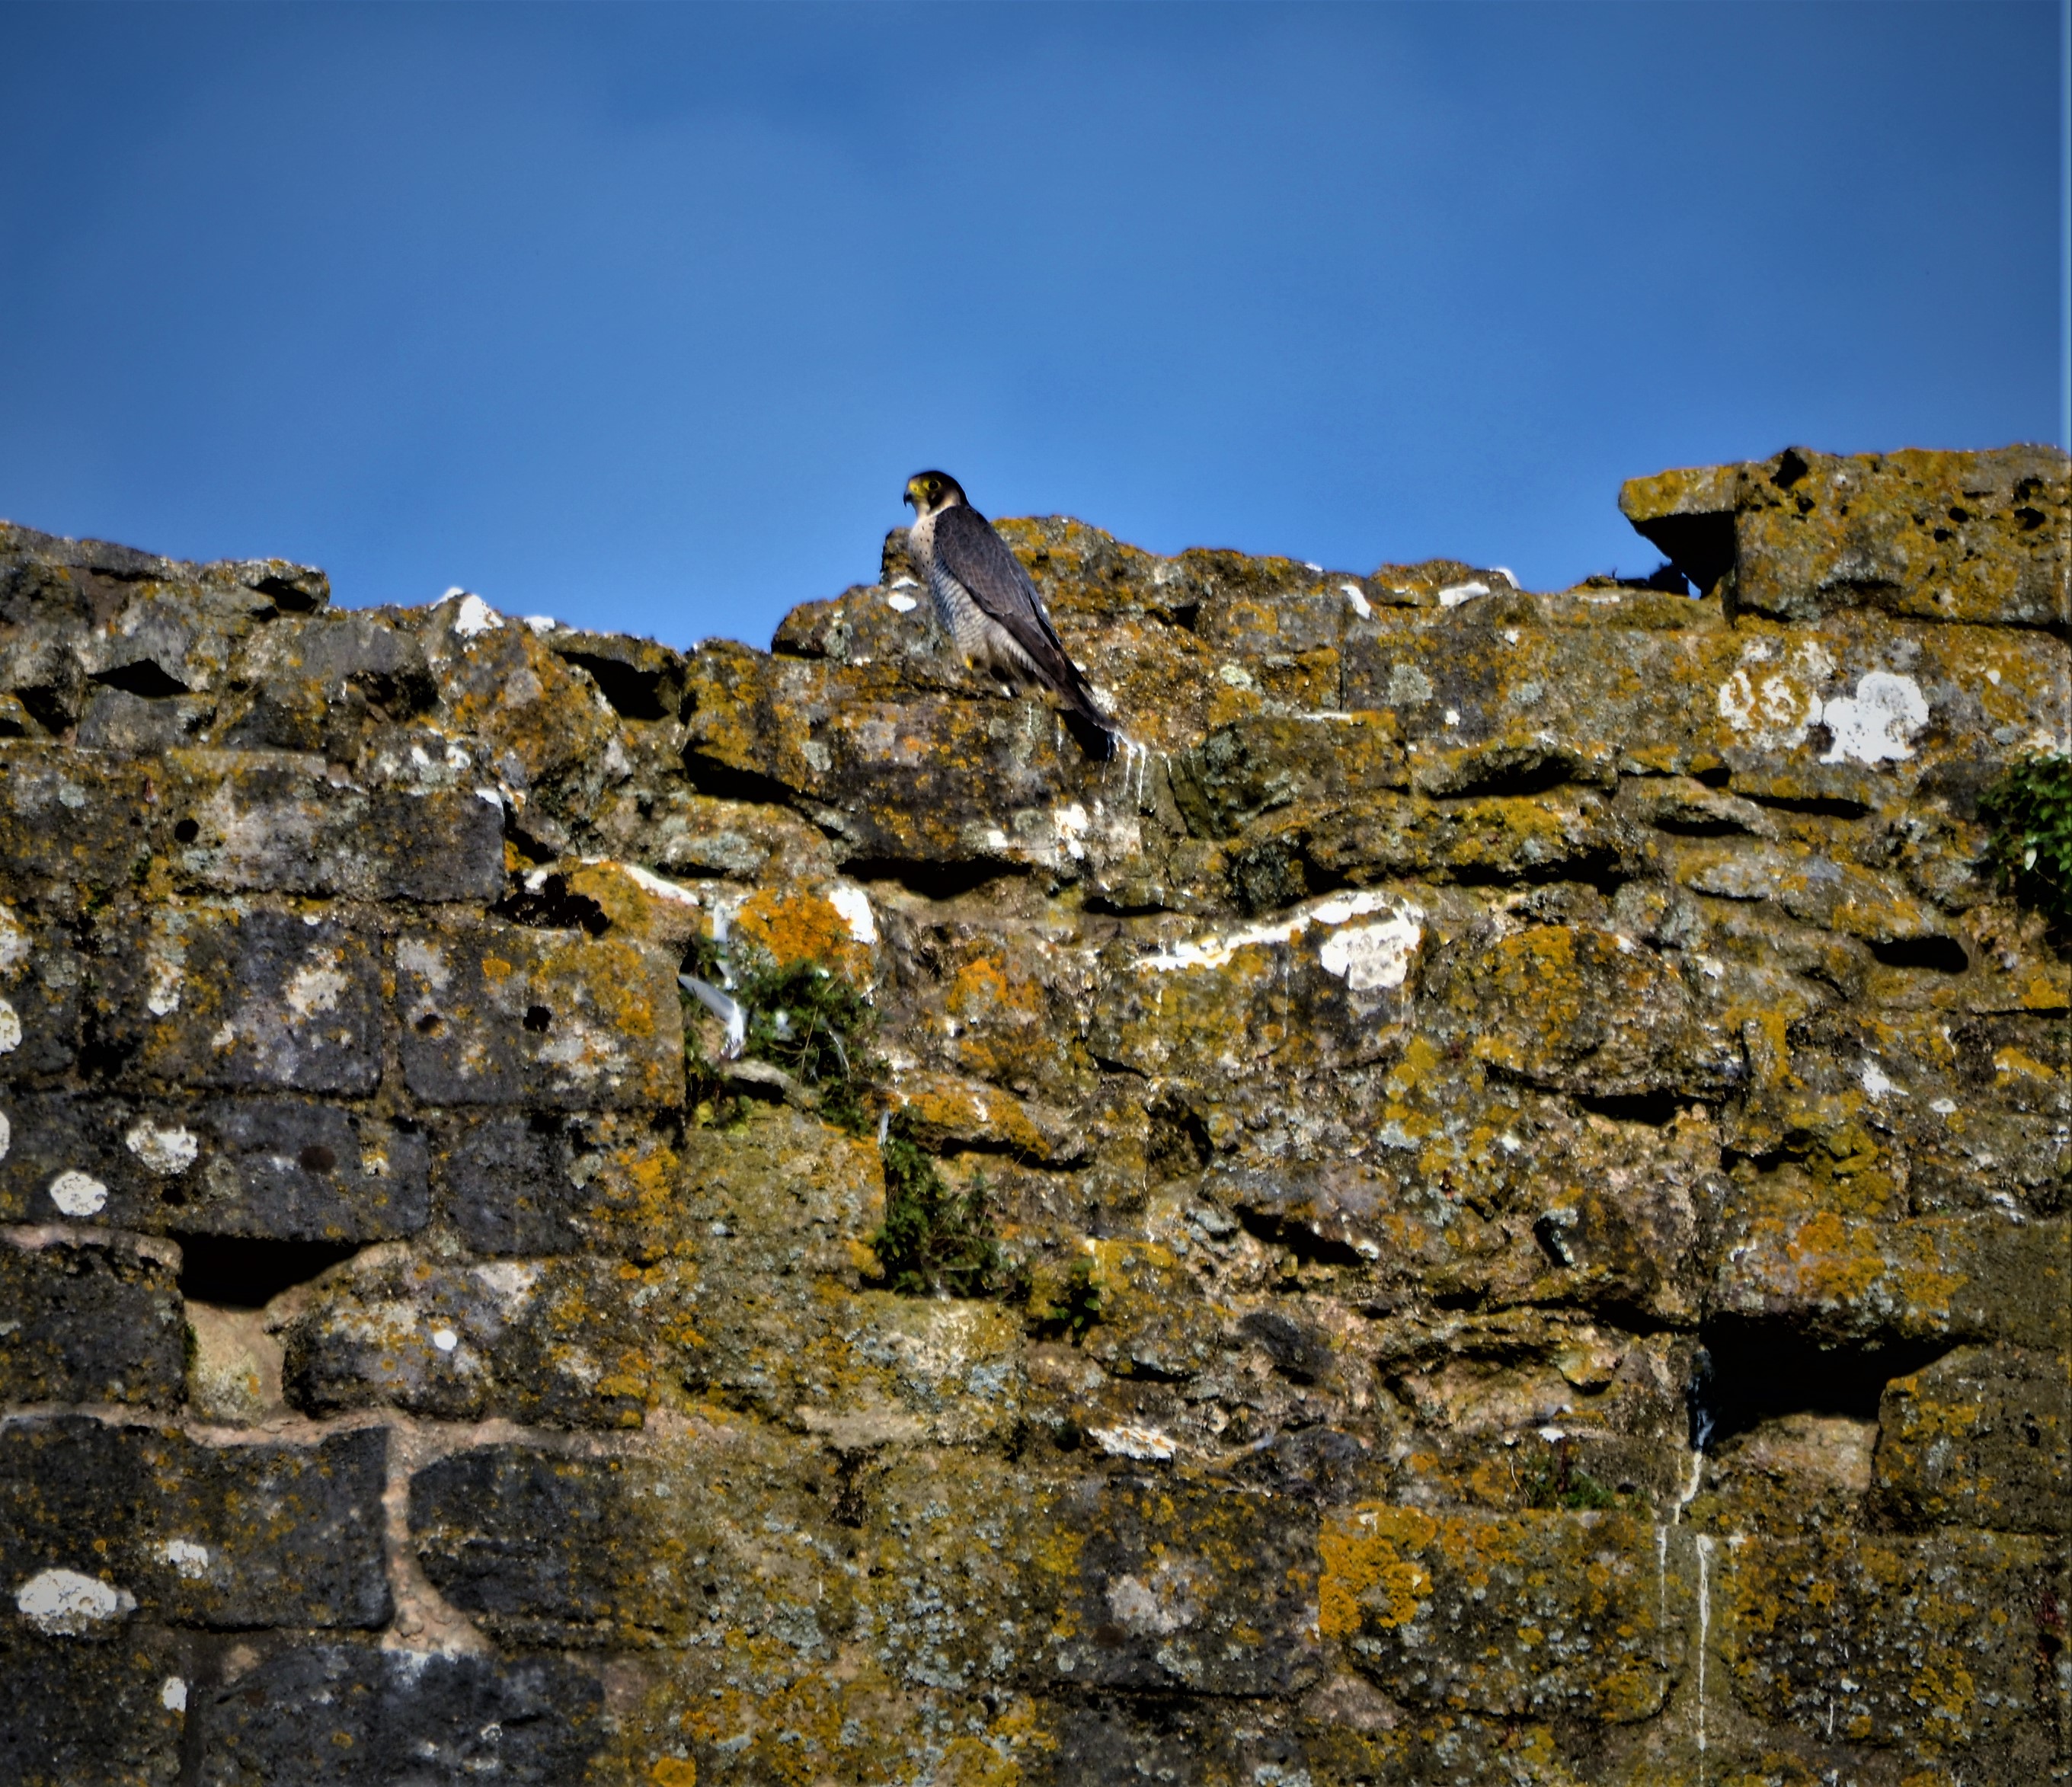 Peregrines are nesting at Corfe Castle, Dorset for the first time since the 1980s